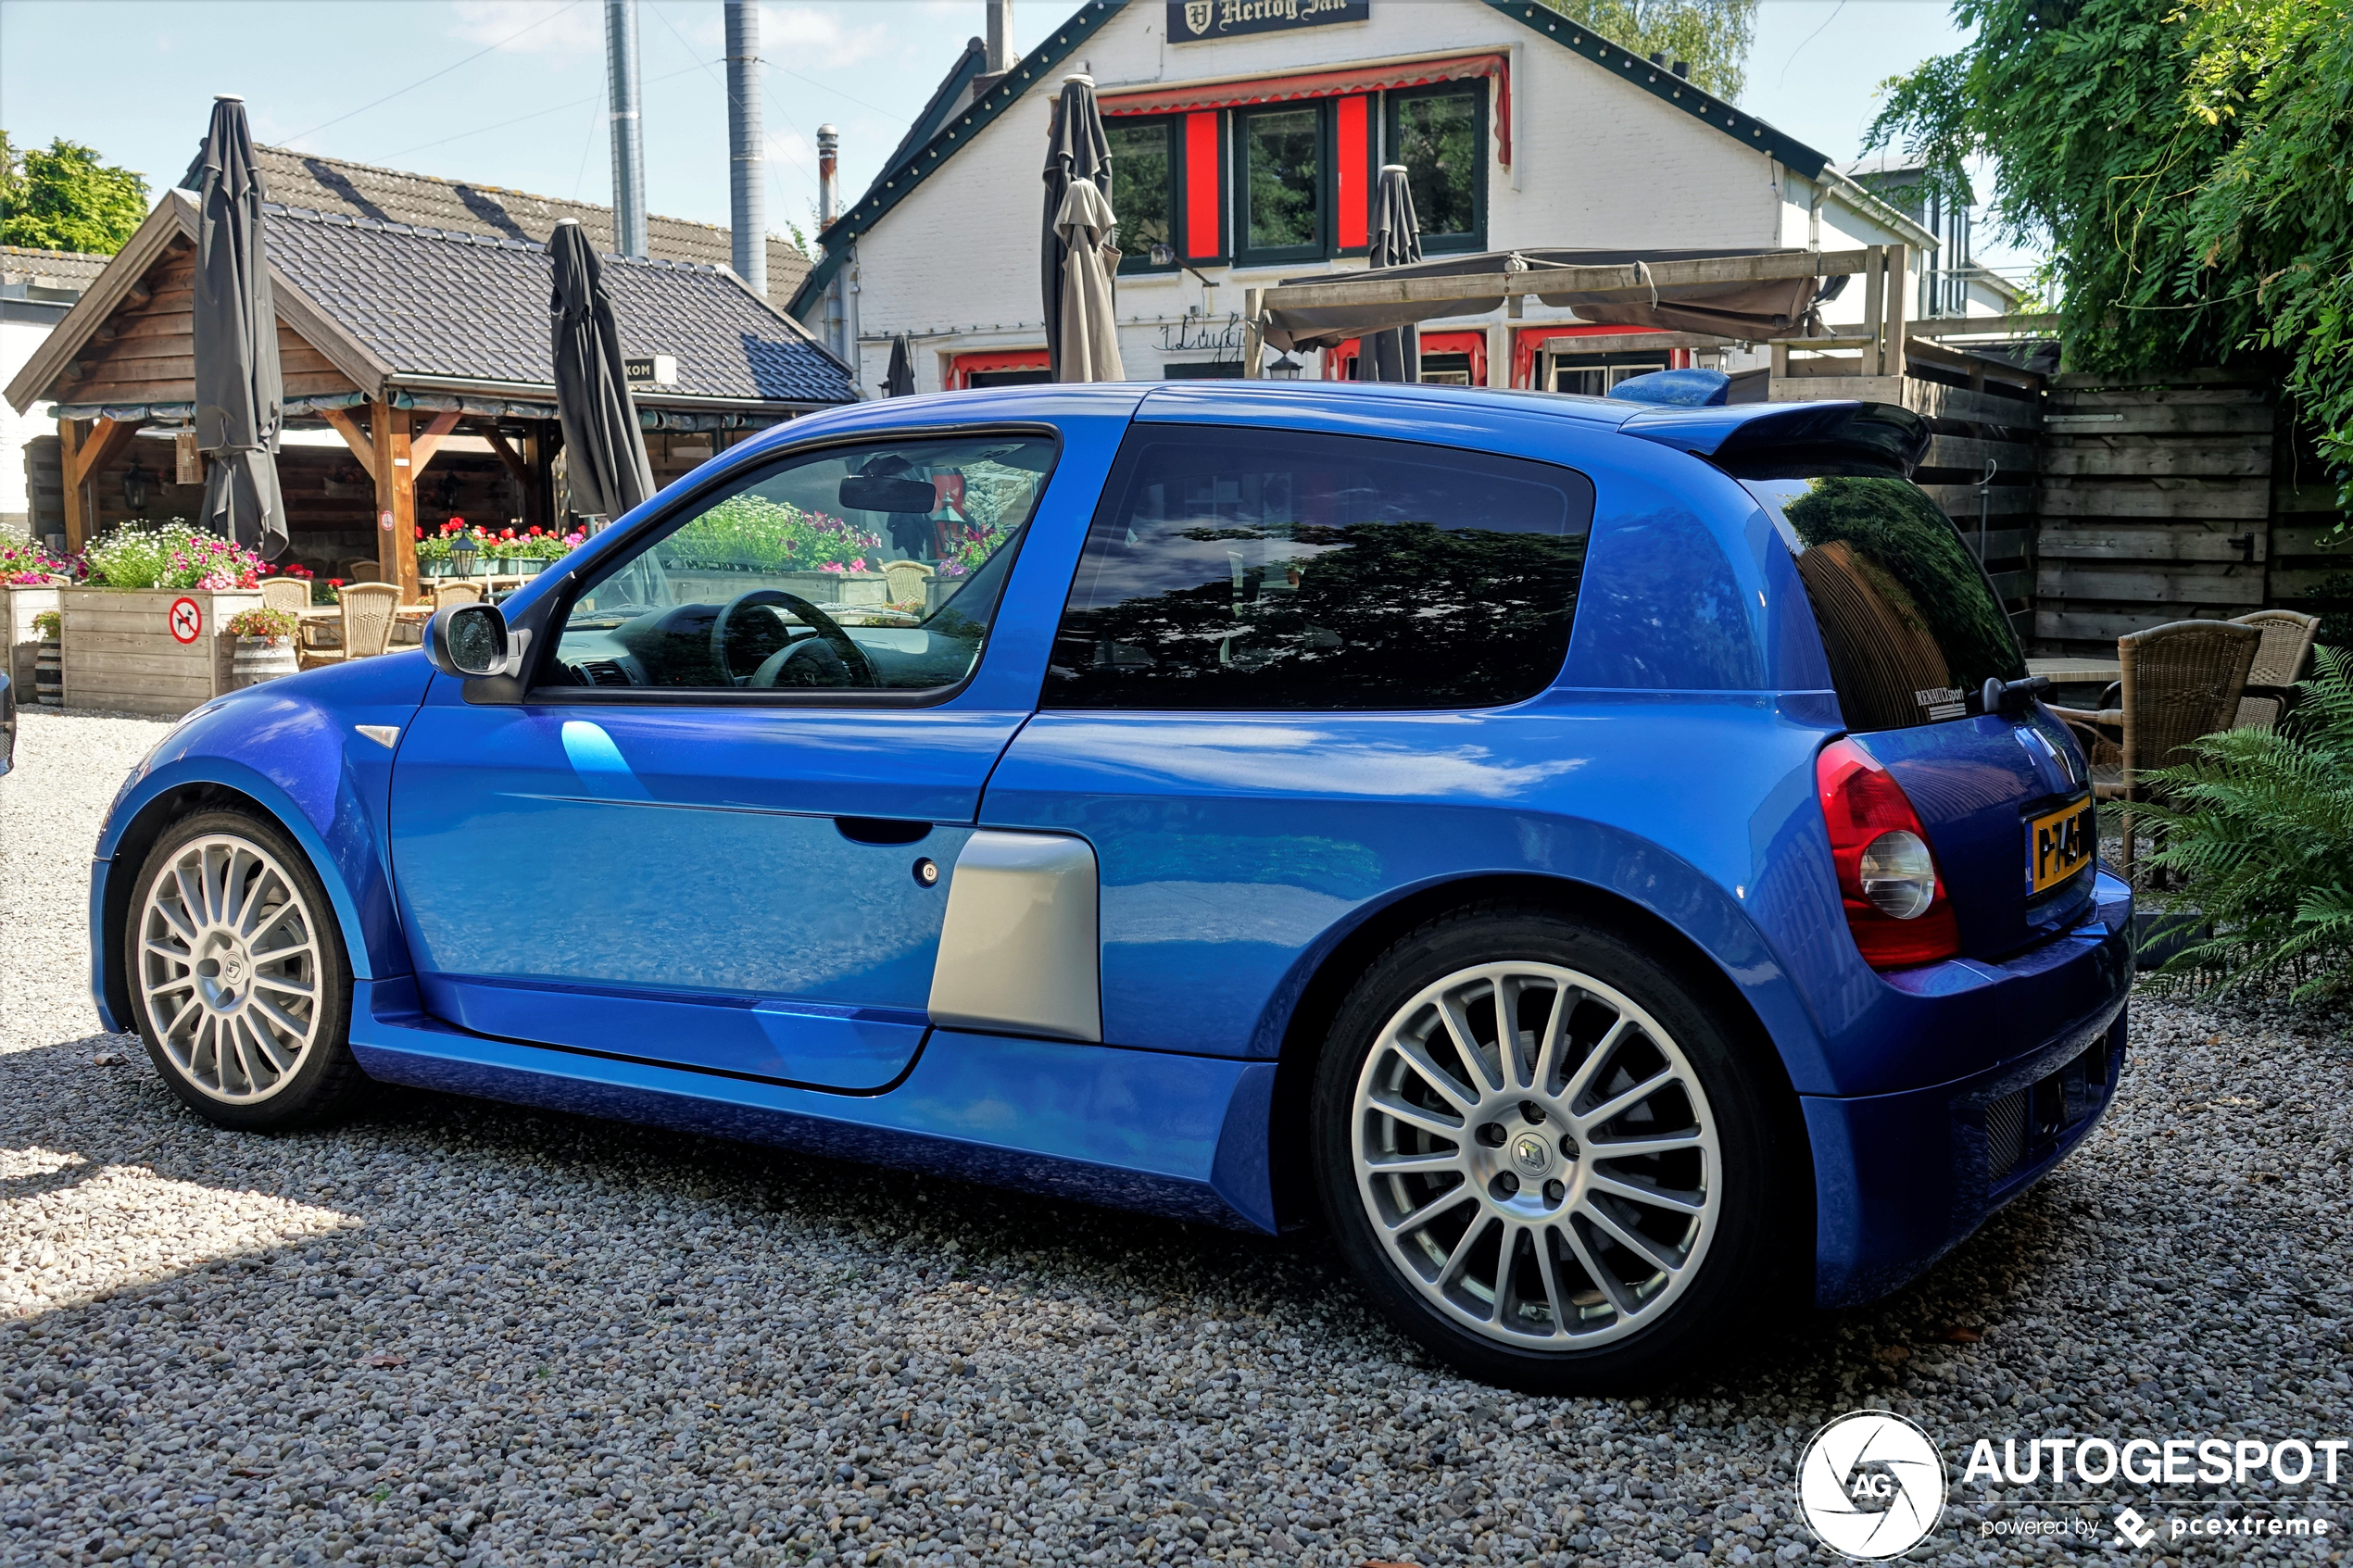 Importje gespot: Renault Clio V6 Phase II